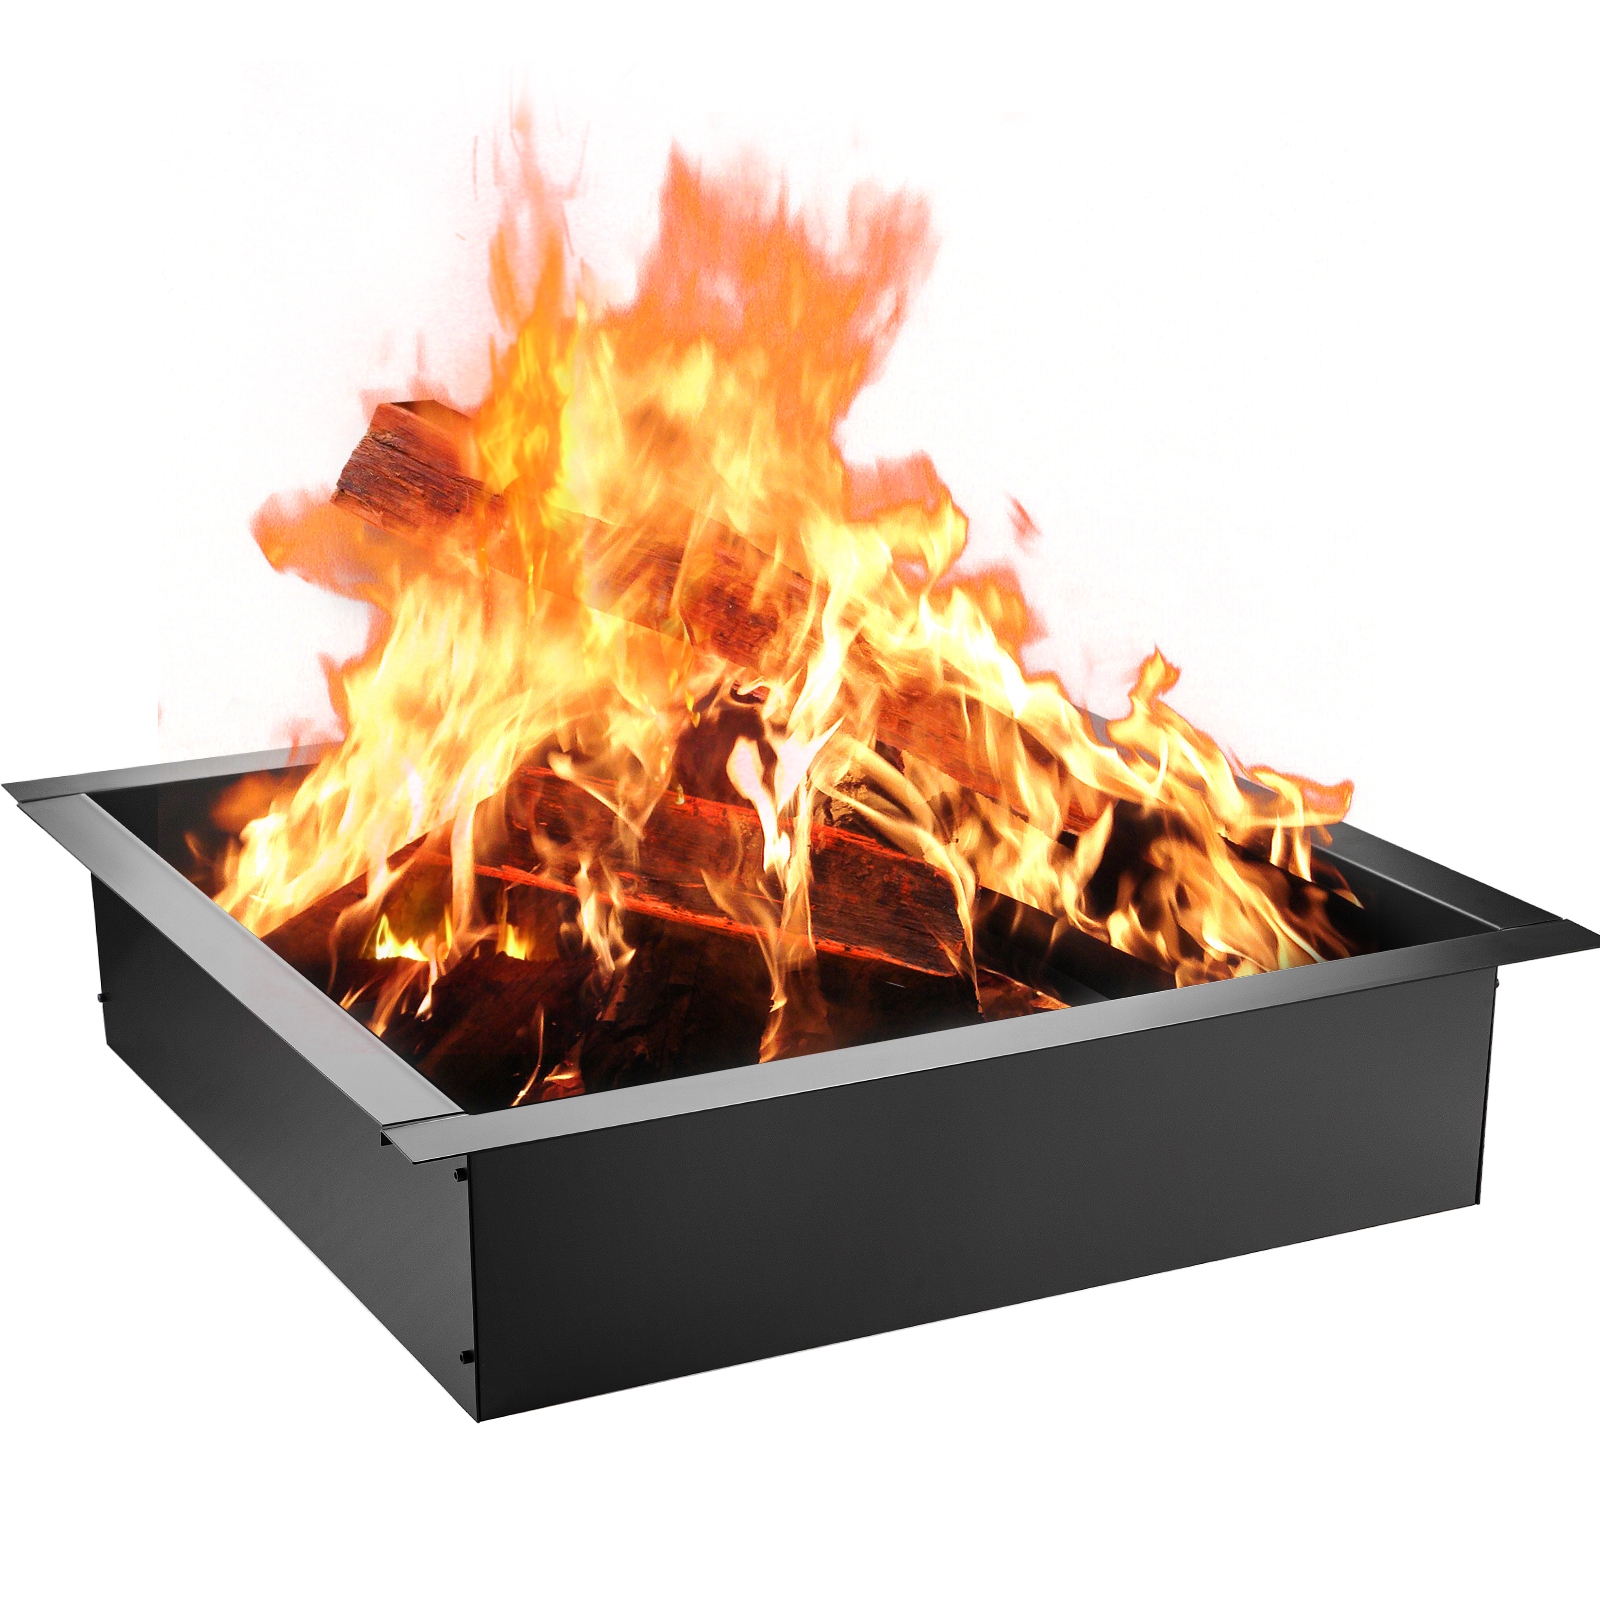 Vevor Fire Pit Liner Steel Fire Ring 30" Square Fire Pit Insert For Outdoors от Vevor Many GEOs